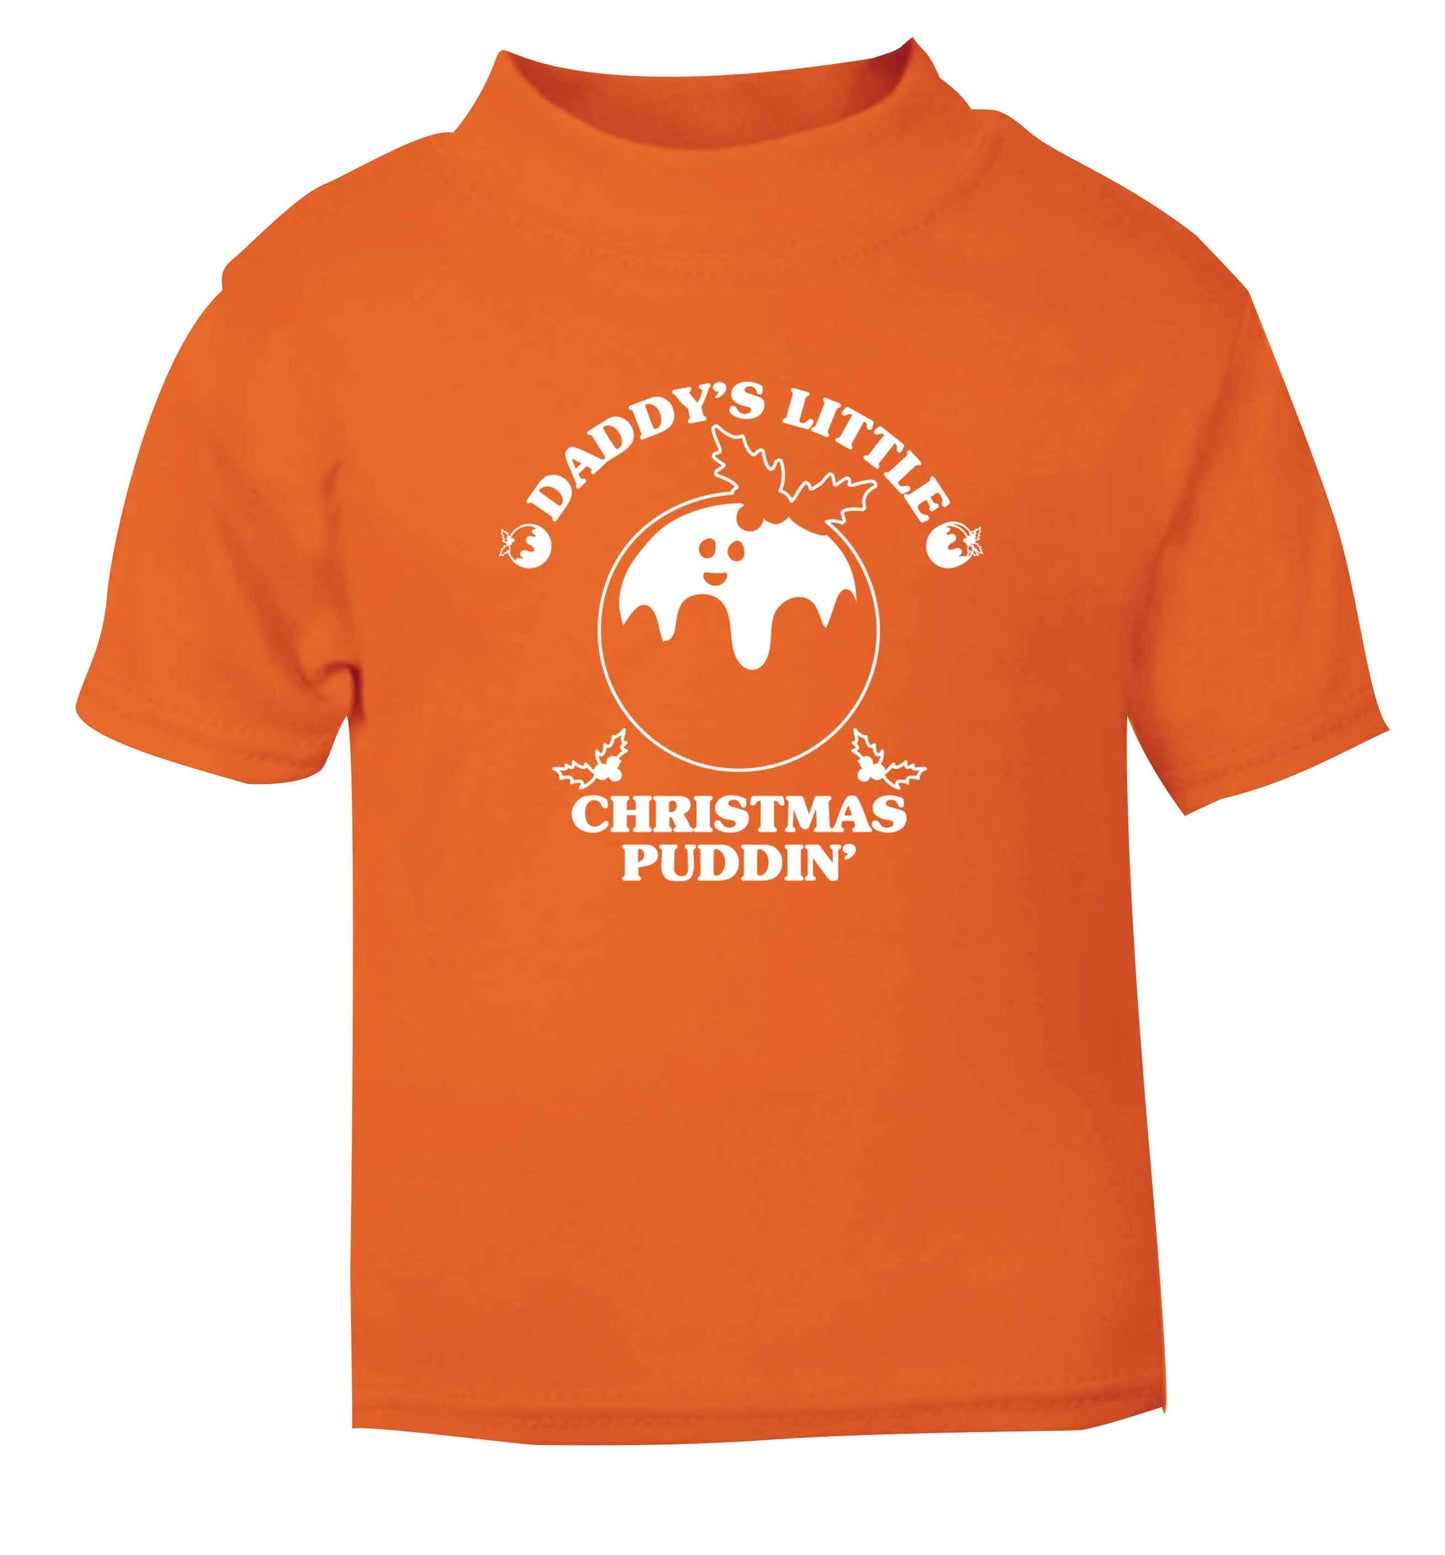 Daddy's little Christmas puddin' orange Baby Toddler Tshirt 2 Years